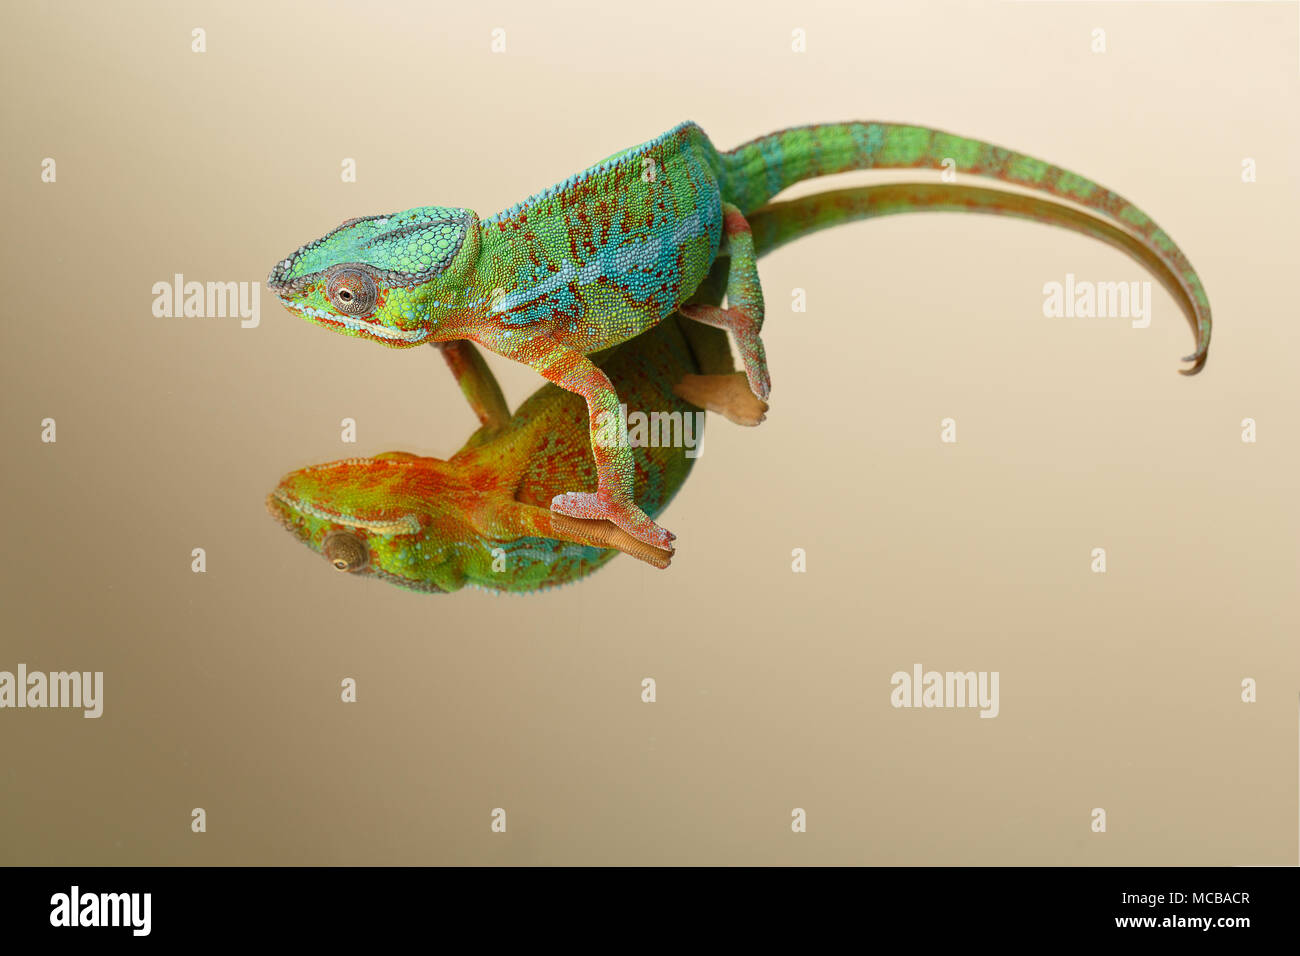 alive chameleon reptile sitting on mirror surface. studio shot on golden background. copy space. Stock Photo